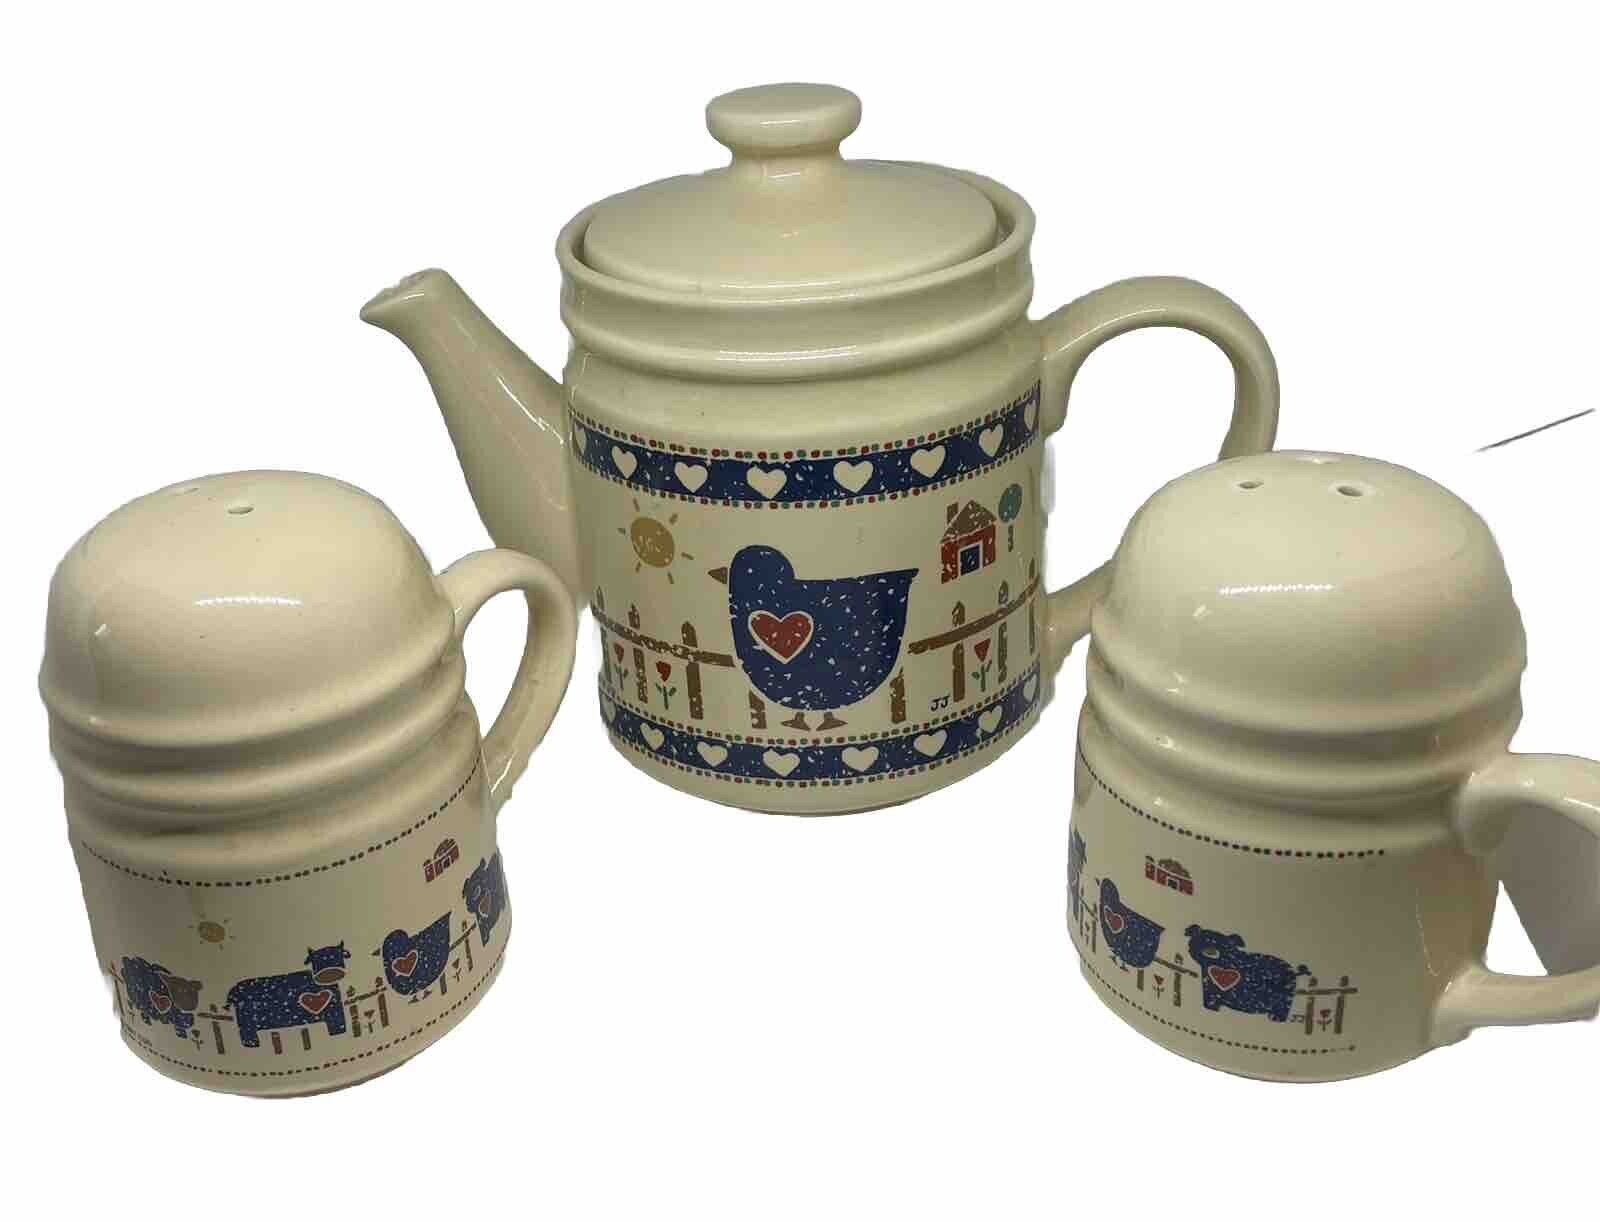 TRADITIONS COUNTRY STYLE TEAPOT AND LARGE SALT AND PEPPER SHAKERS CGD 1985